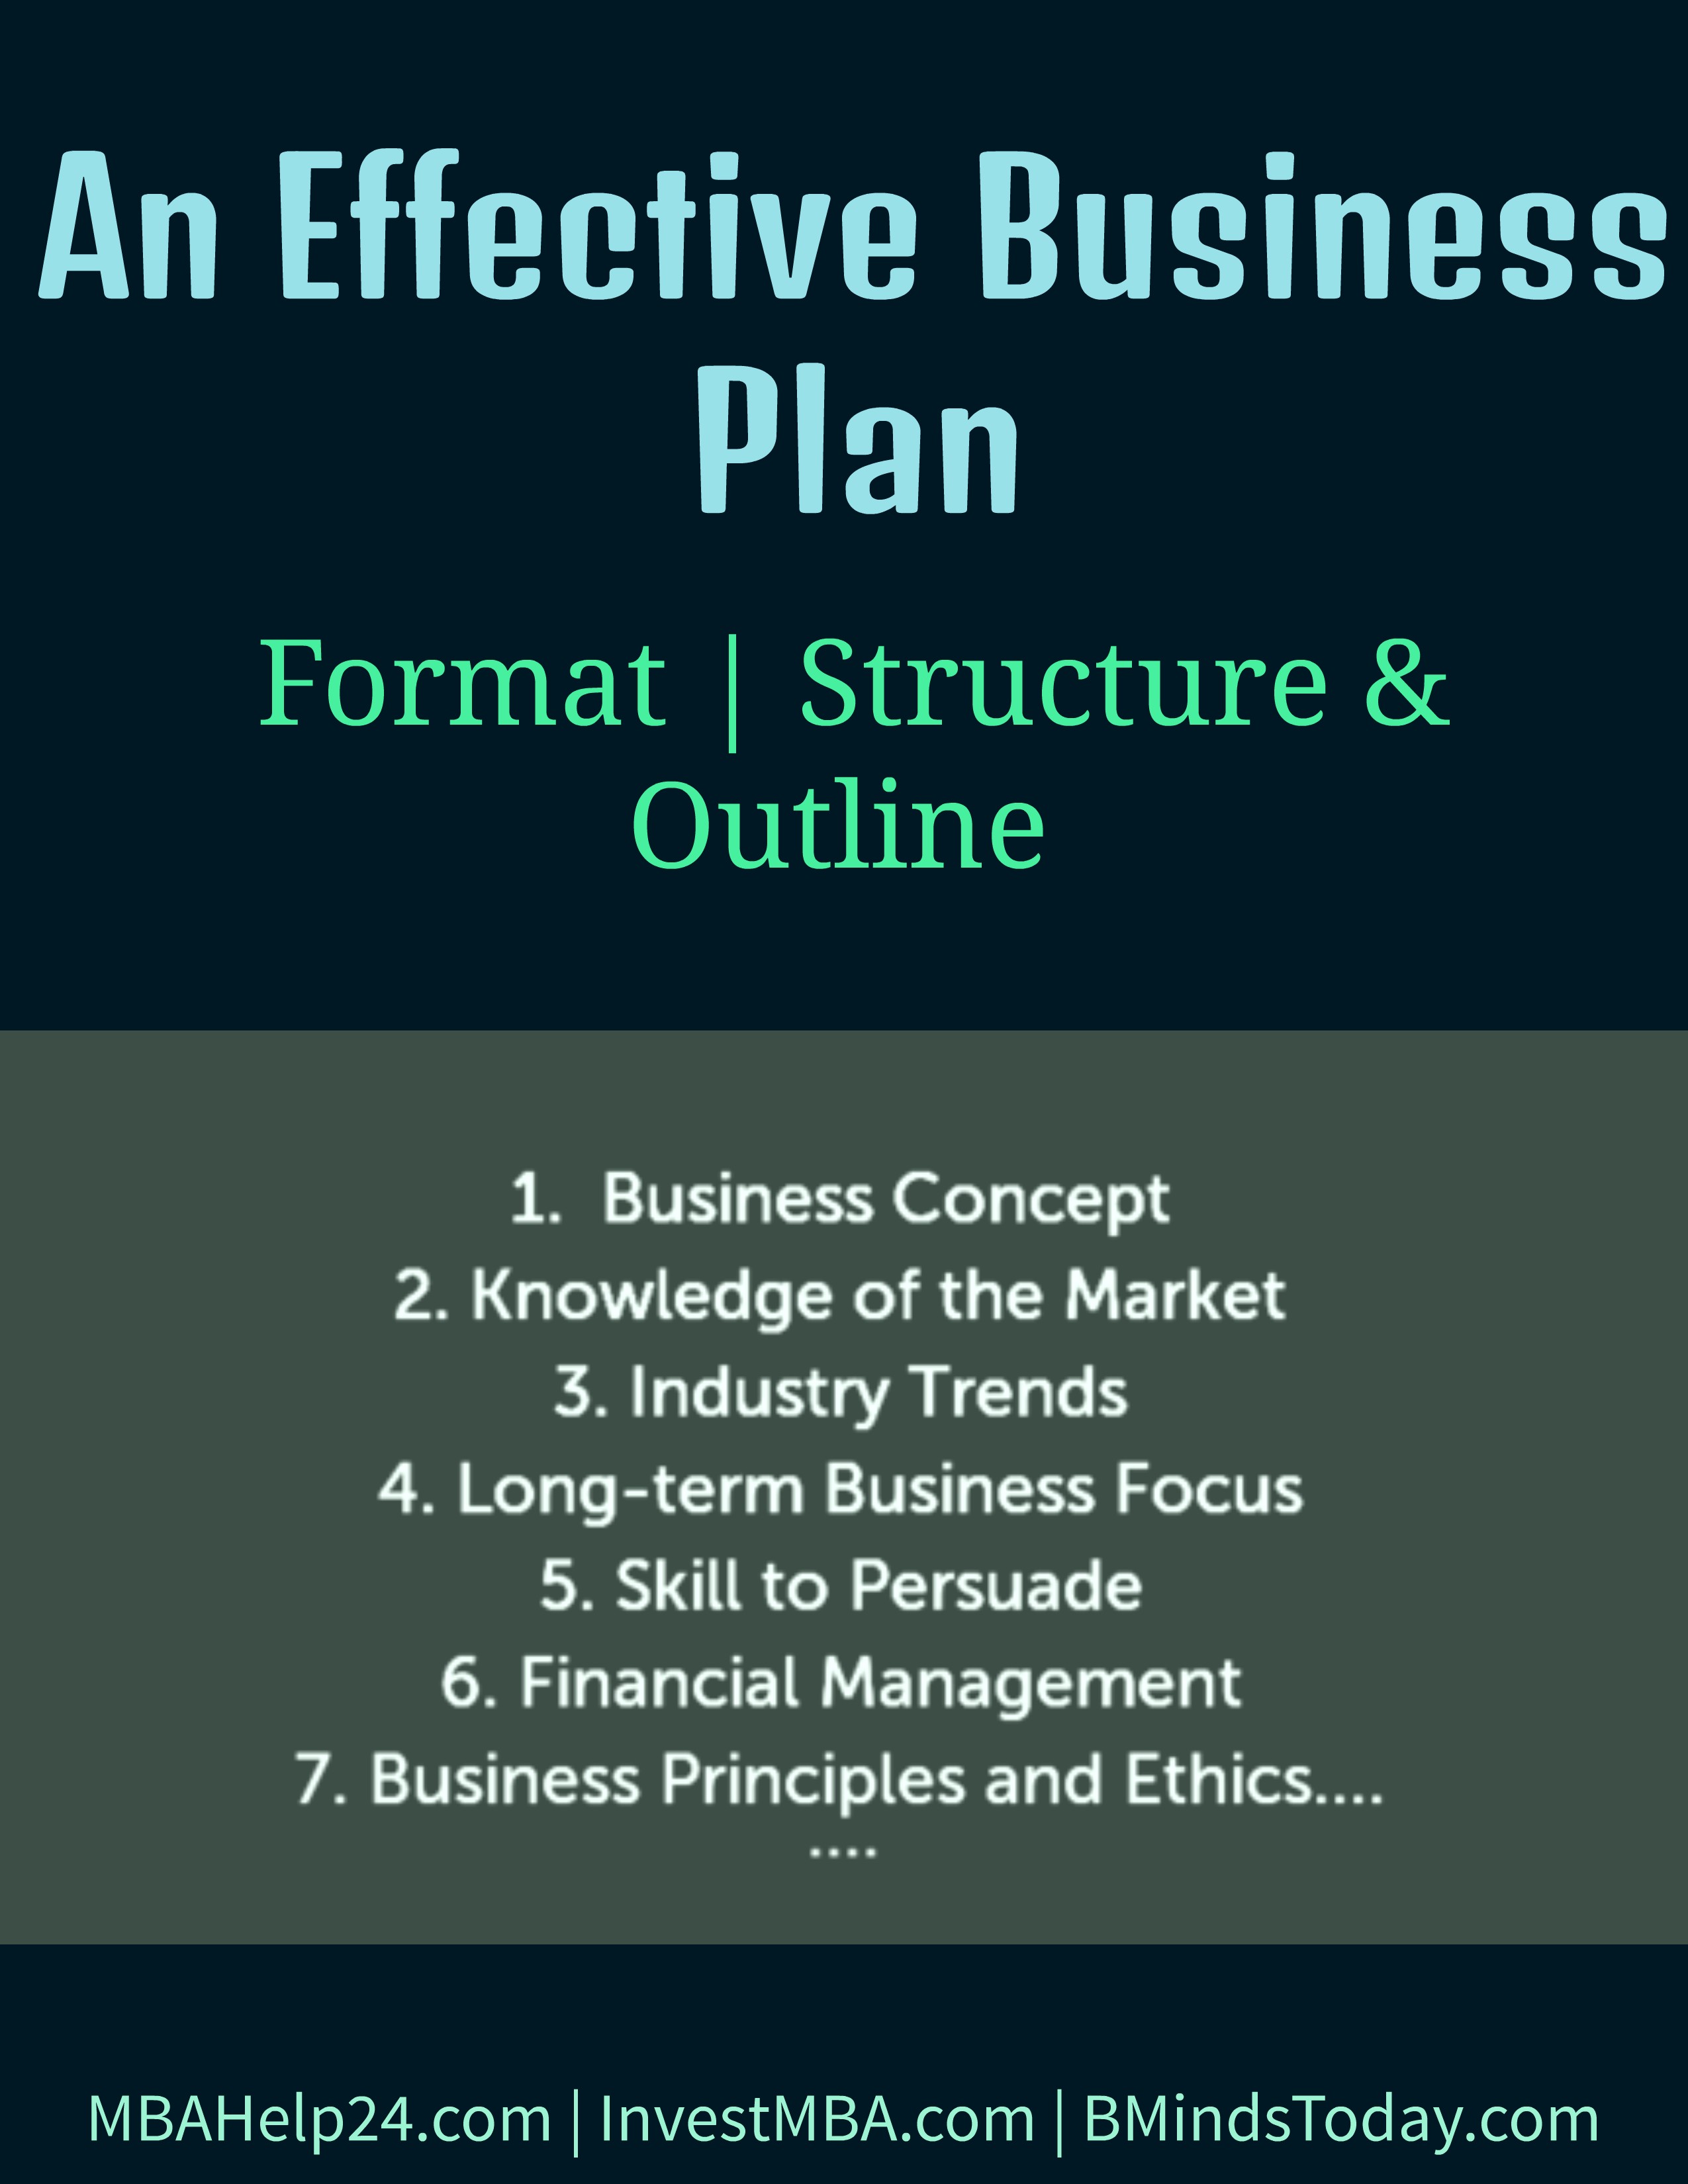 An Effective Business Plan | Format | Structure | Outline business plan An Effective Business Plan: Format, Structure &#038; Outline an effective business plan Structure and Outline